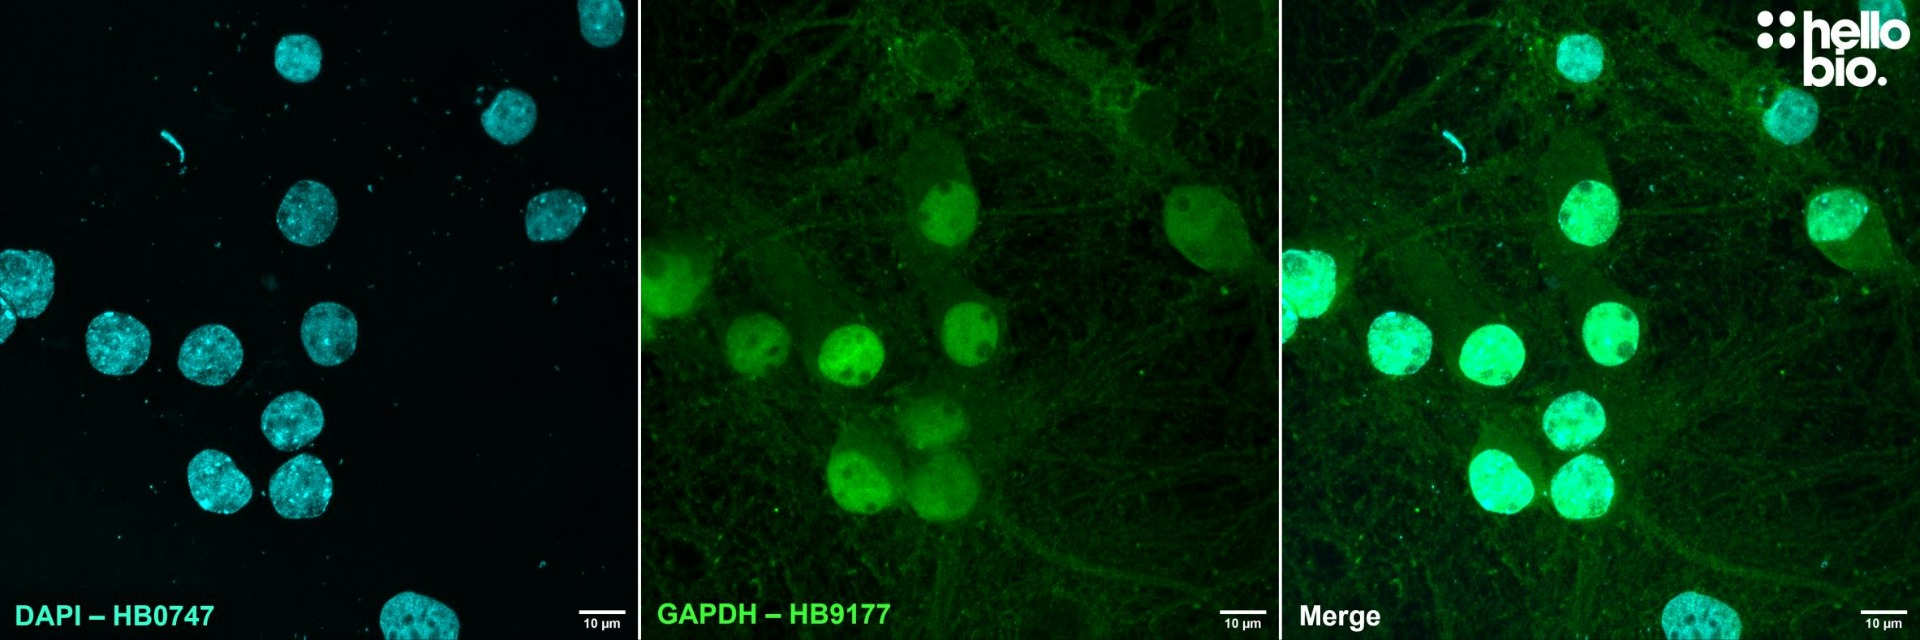 Figure 4. GAPDH expression in cultured rat neurones visualised using HB9177. 